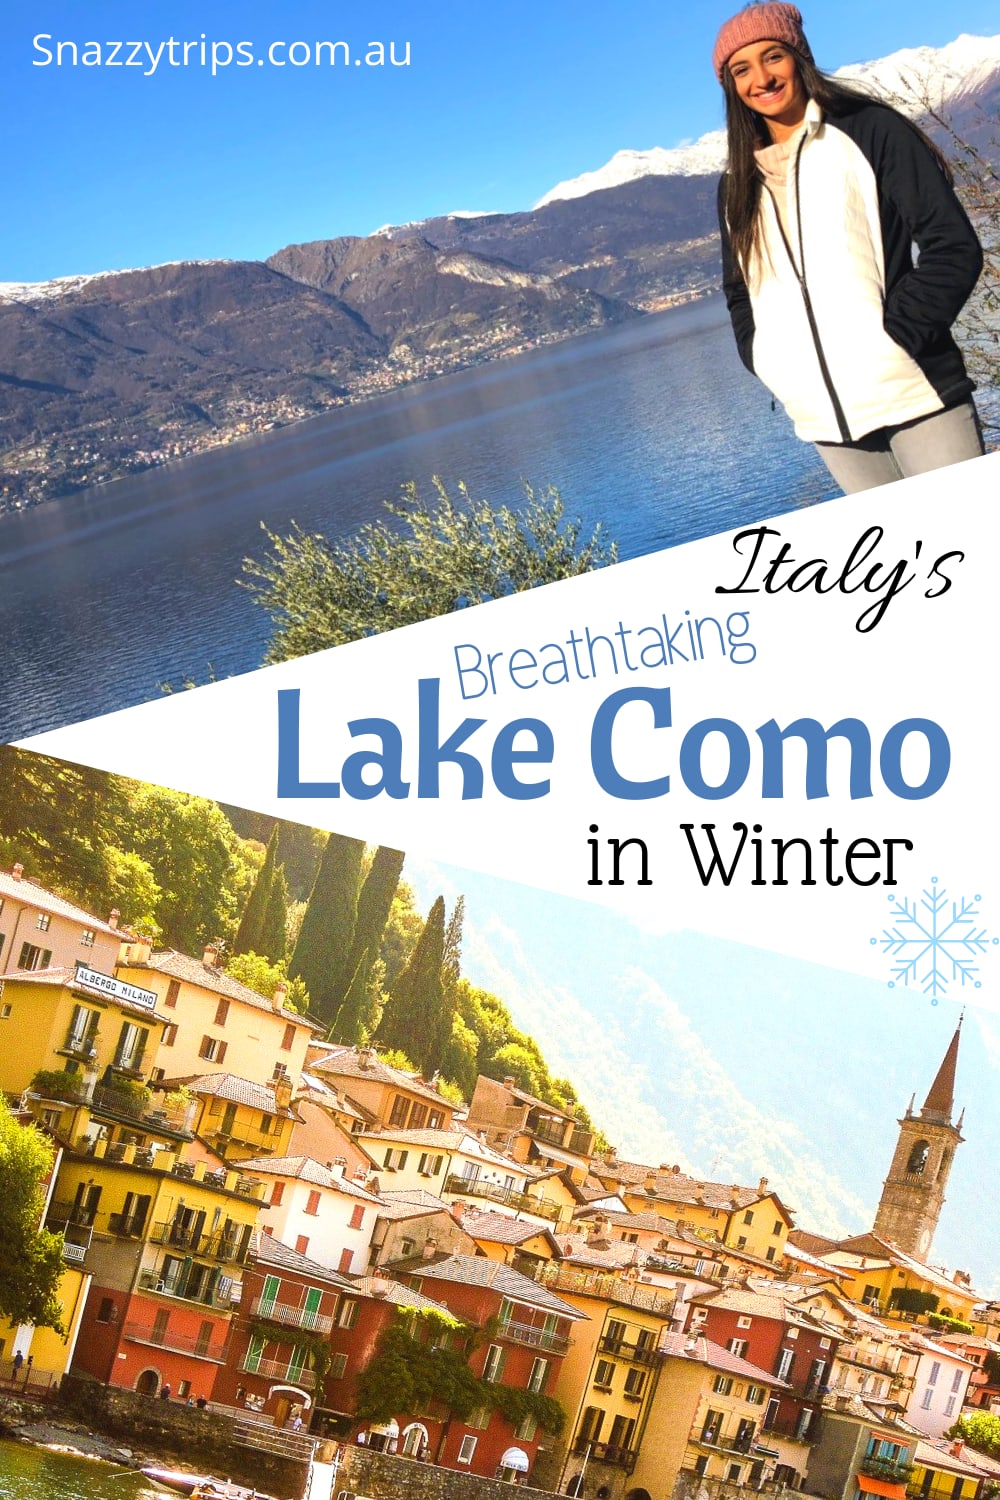 Lake Como In Winter Is Breathtaking - SNAZZY TRIPS travel blog